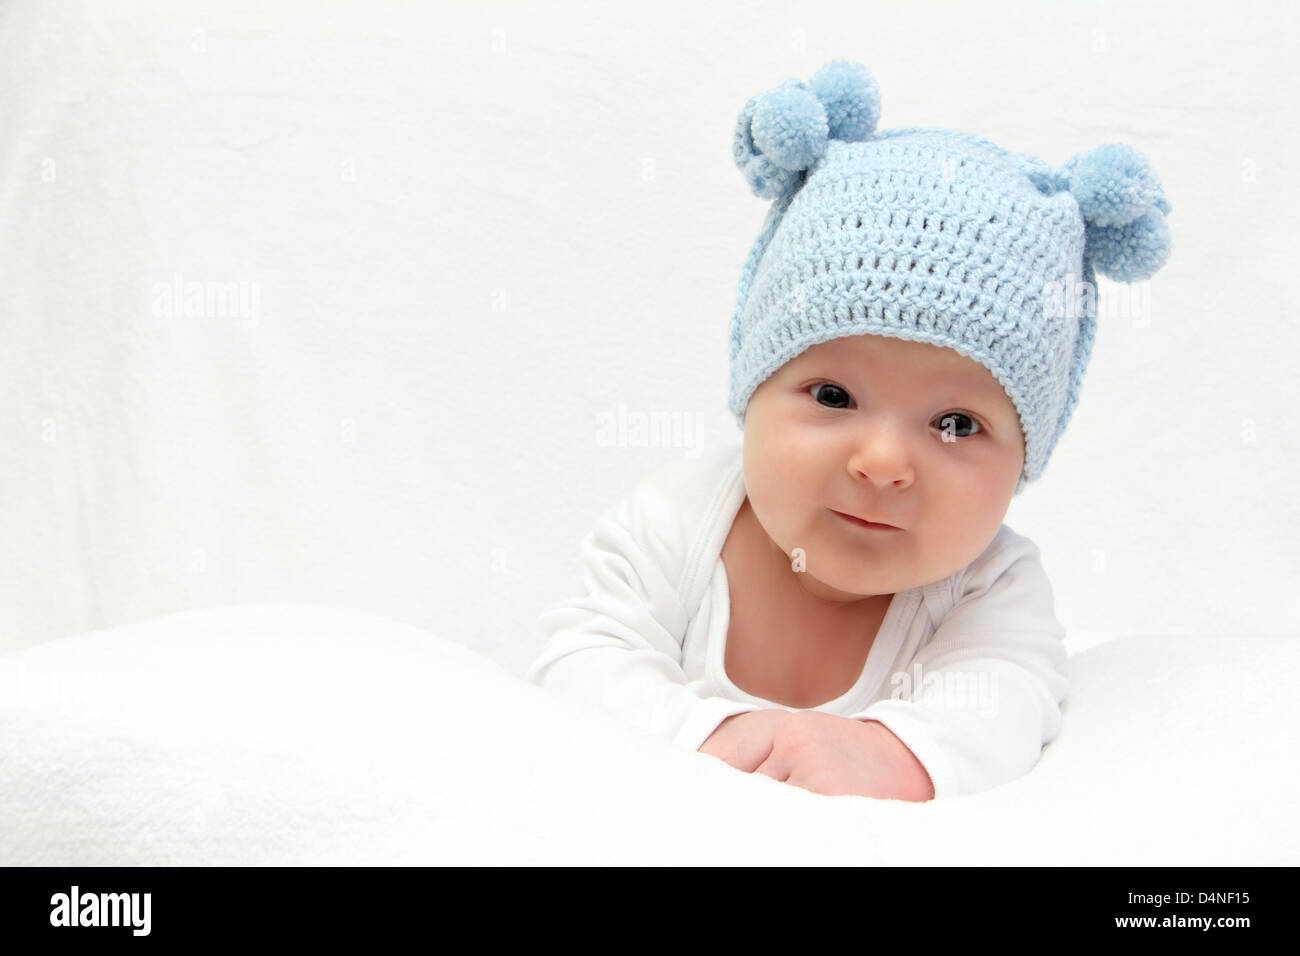 baby in blue knitted hat Stock Photo